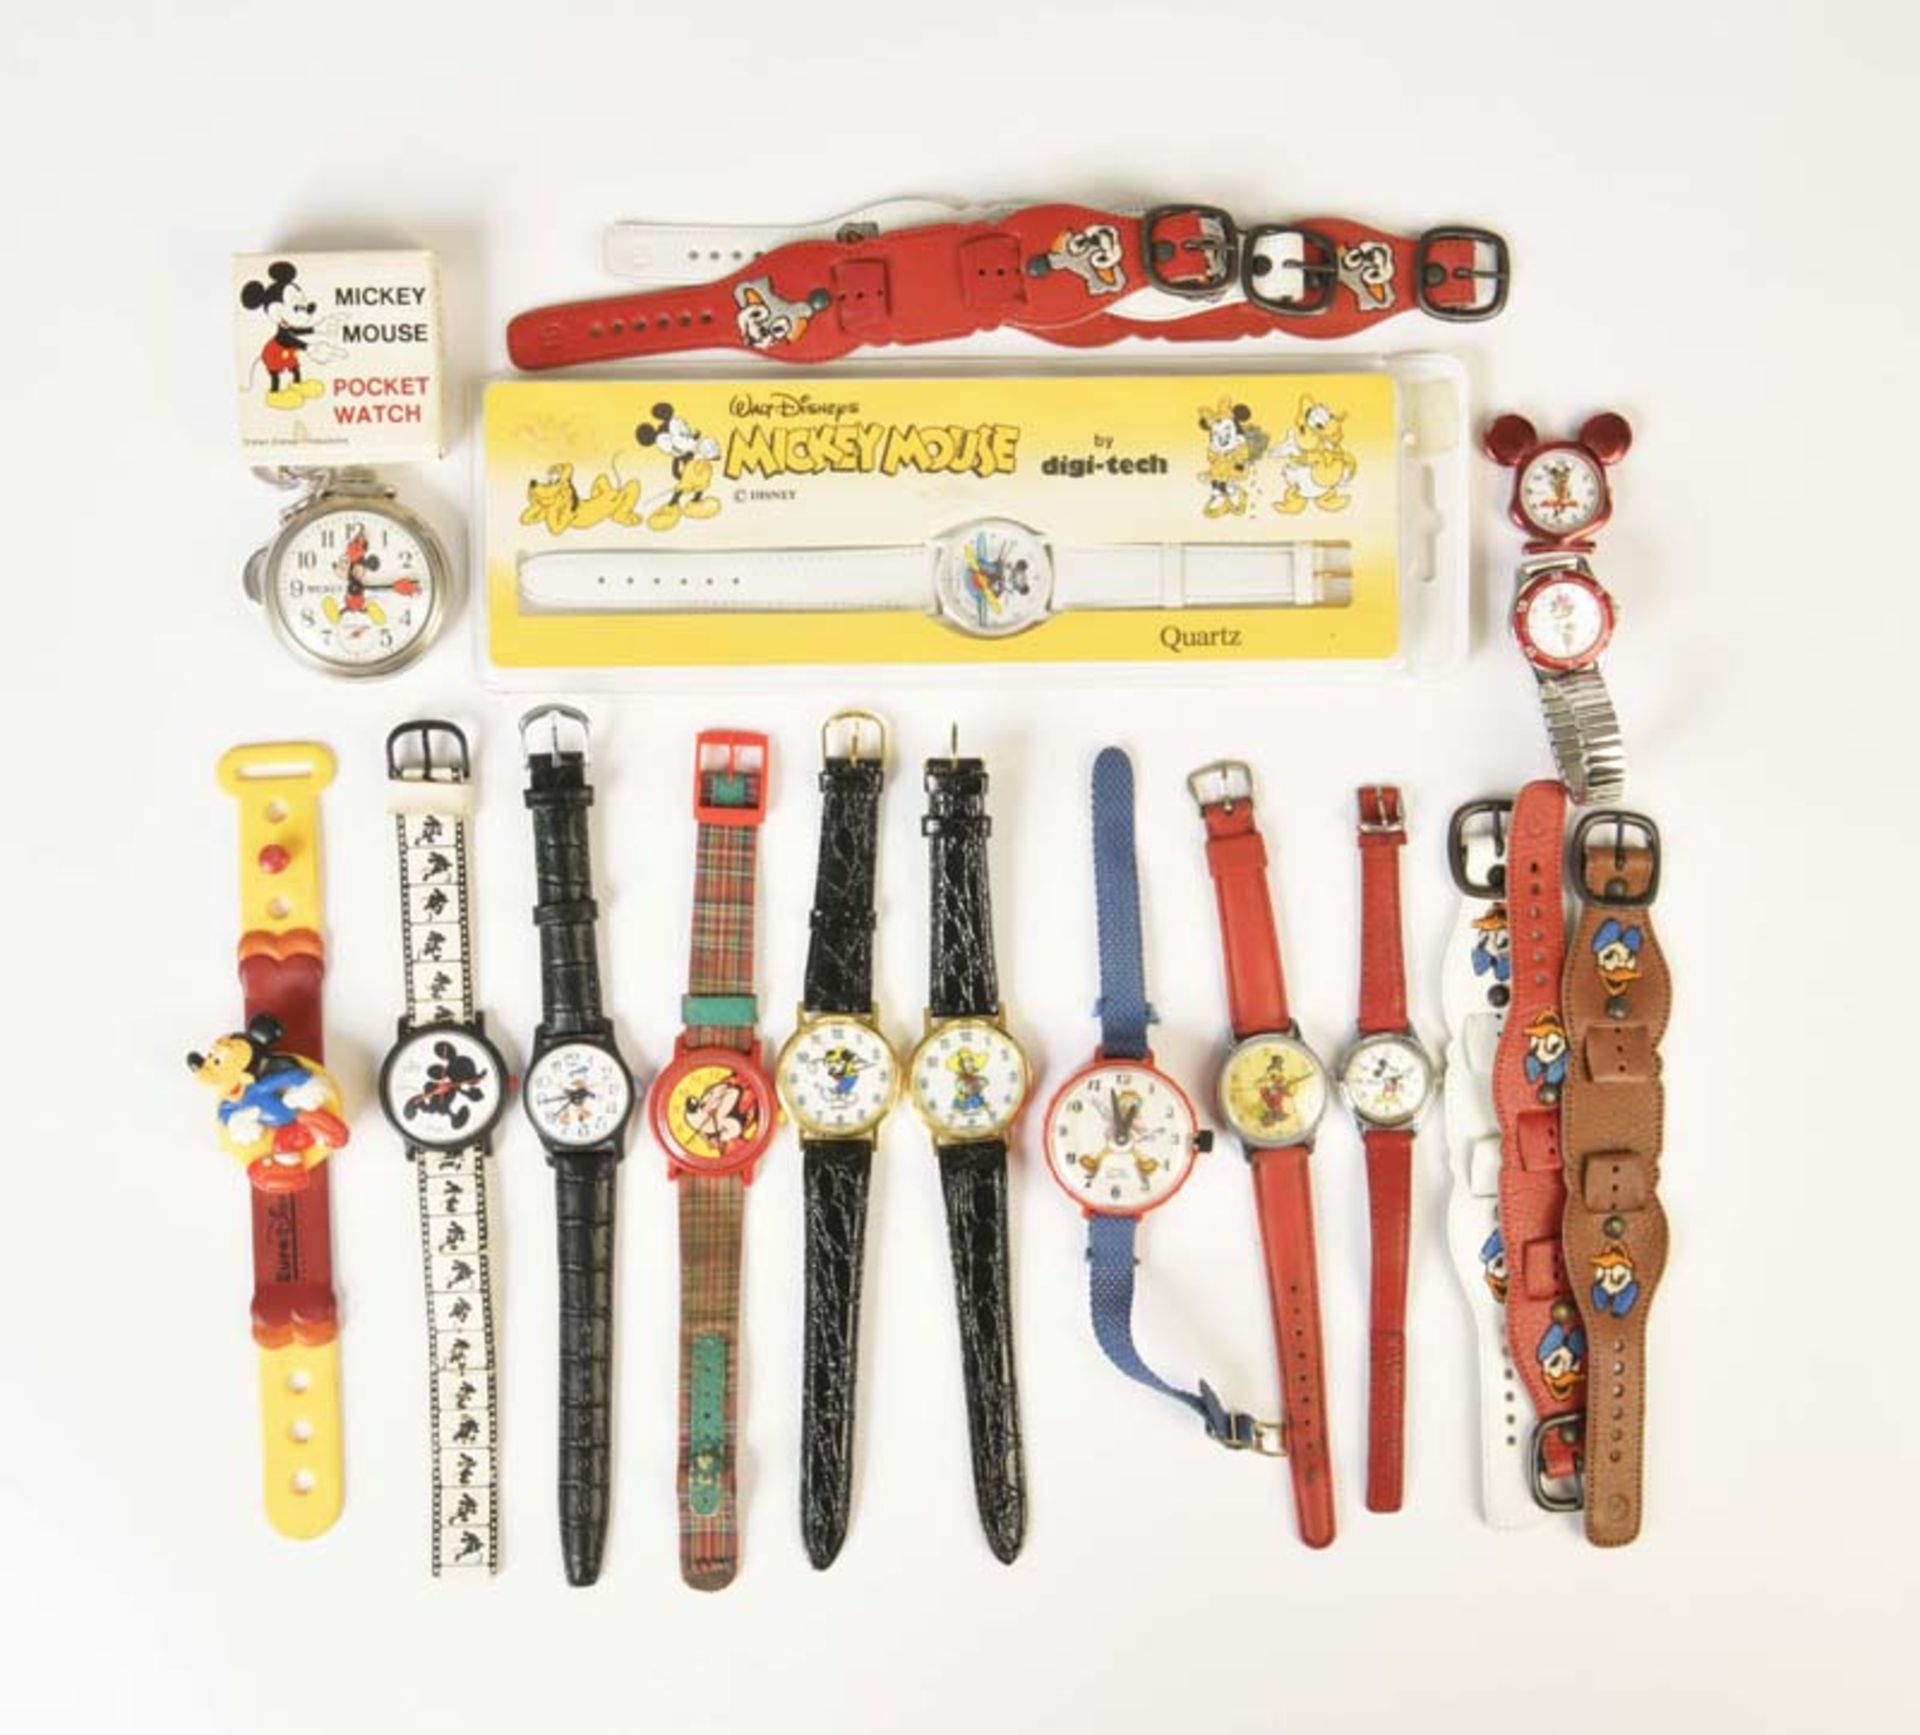 12 Watches, 1 Pocket Watch + several Wristbands with Disney Motives, function not checked, from